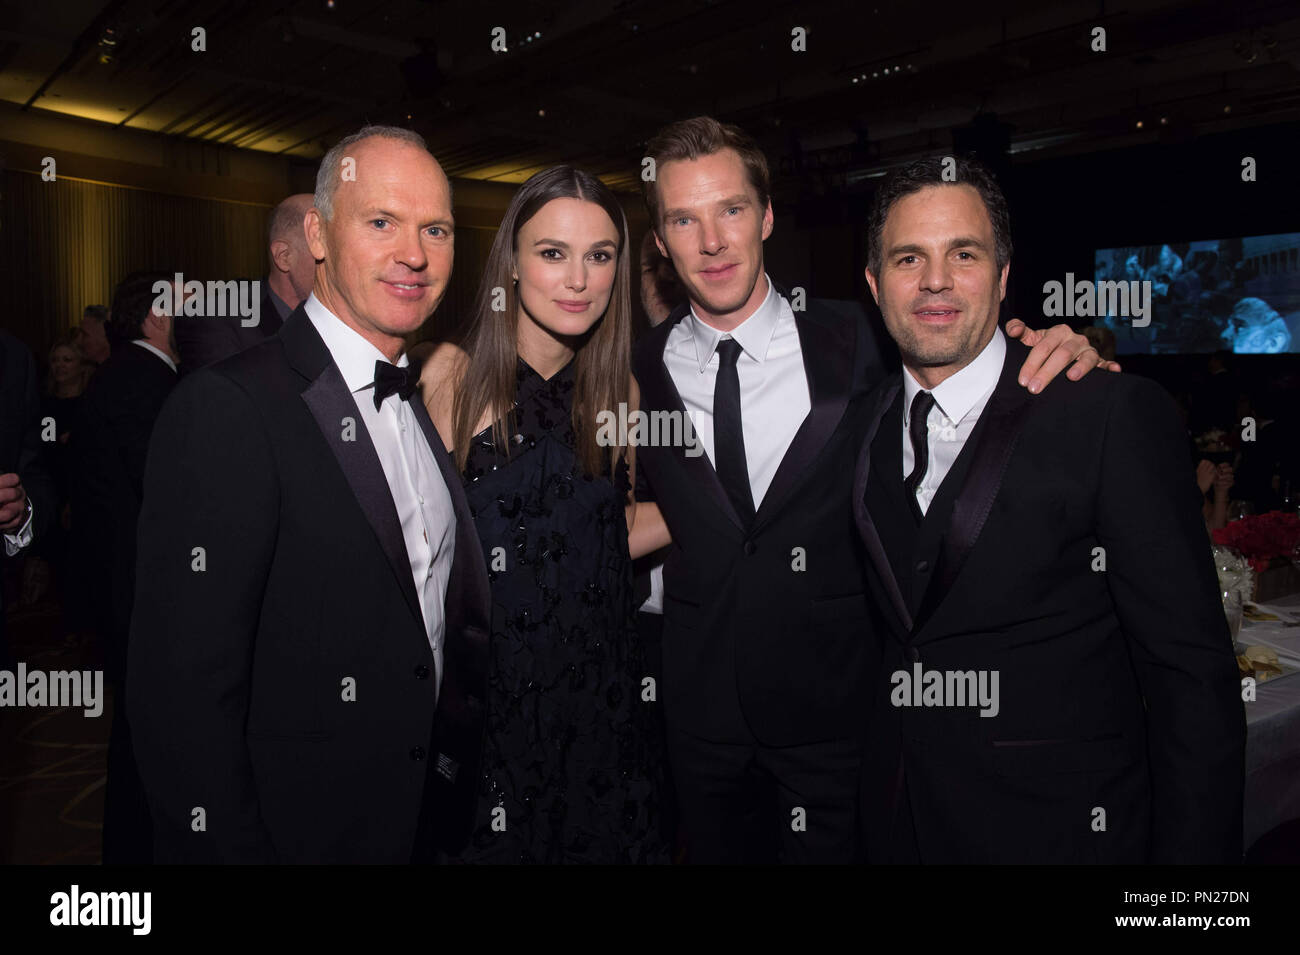 (Left to right): Michael Keaton, Keira Knightley, Benedict Cumberbatch and Mark Ruffalo attend the 6th Annual Governors Awards in The Ray Dolby Ballroom at Hollywood & Highland Center® in Hollywood, CA, on Saturday, November 8, 2014.  File Reference # 32487 184THA  For Editorial Use Only -  All Rights Reserved Stock Photo